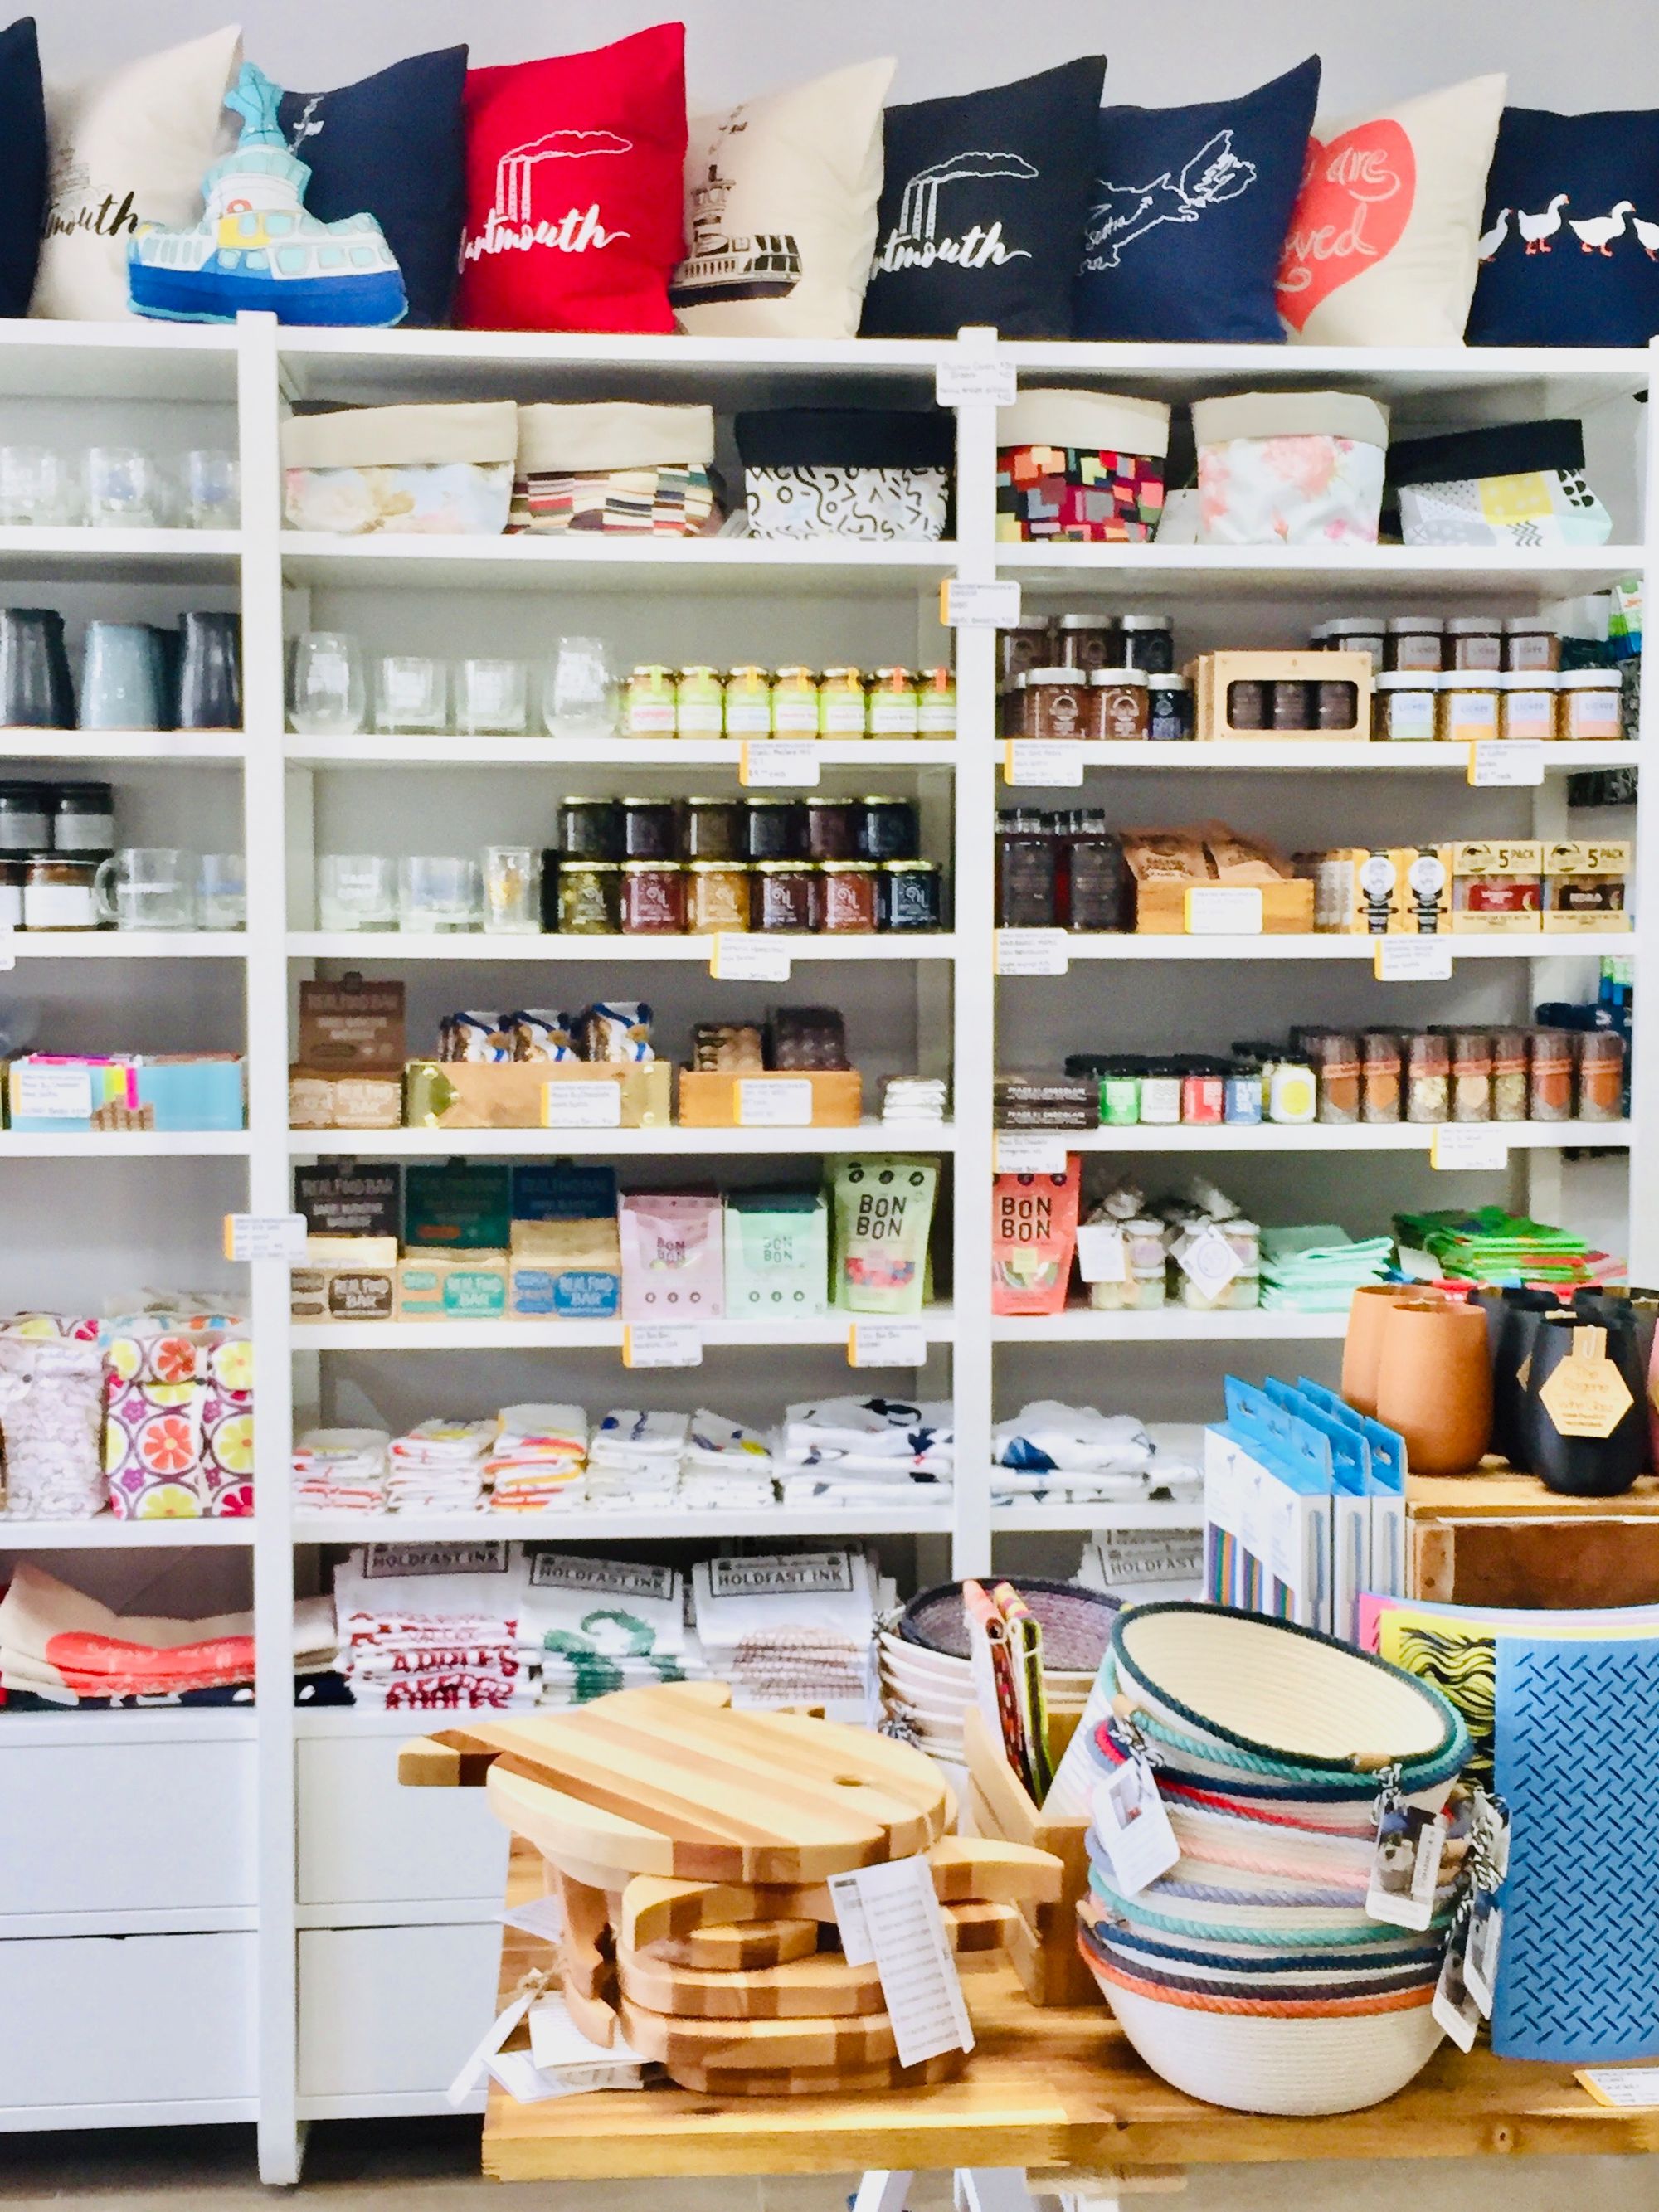 The interior of The Trainyard store in Dartmouth, Nova Scotia. In front of shelves displaying handmade goods is a table piled